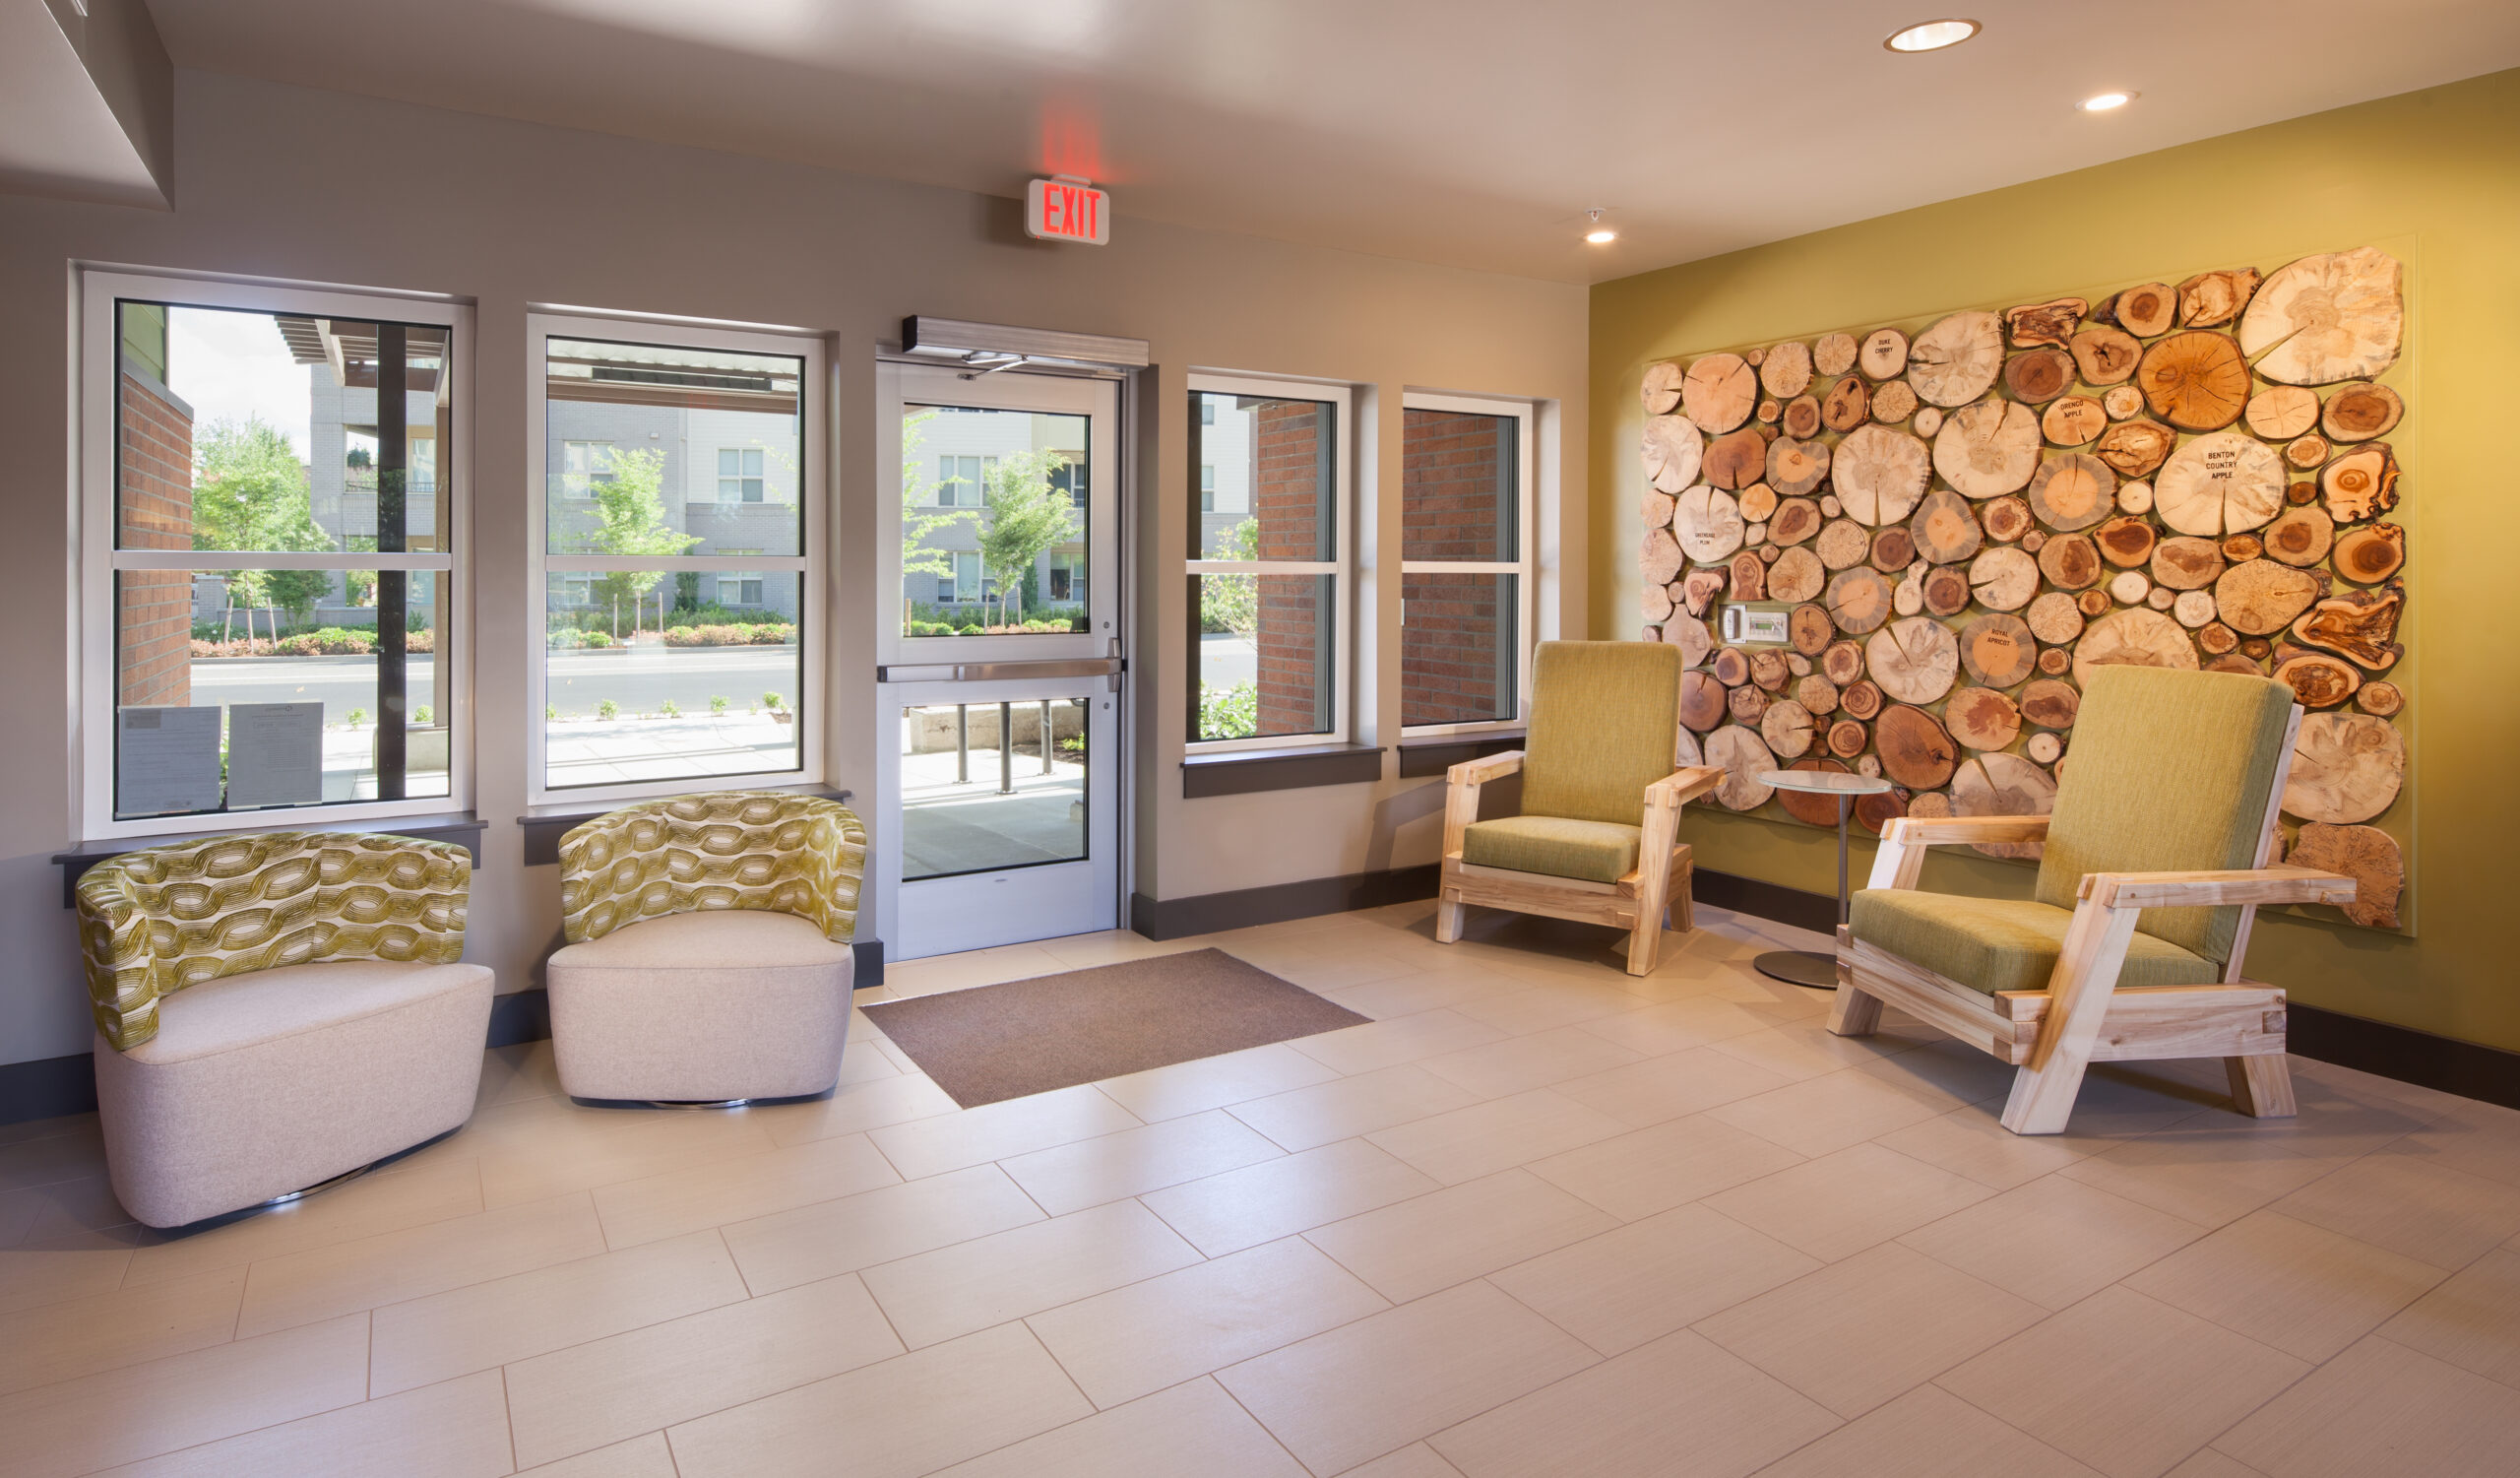 Wood tiles and cottonwood lobby chairs designed by Michael for Orchards at Orenco